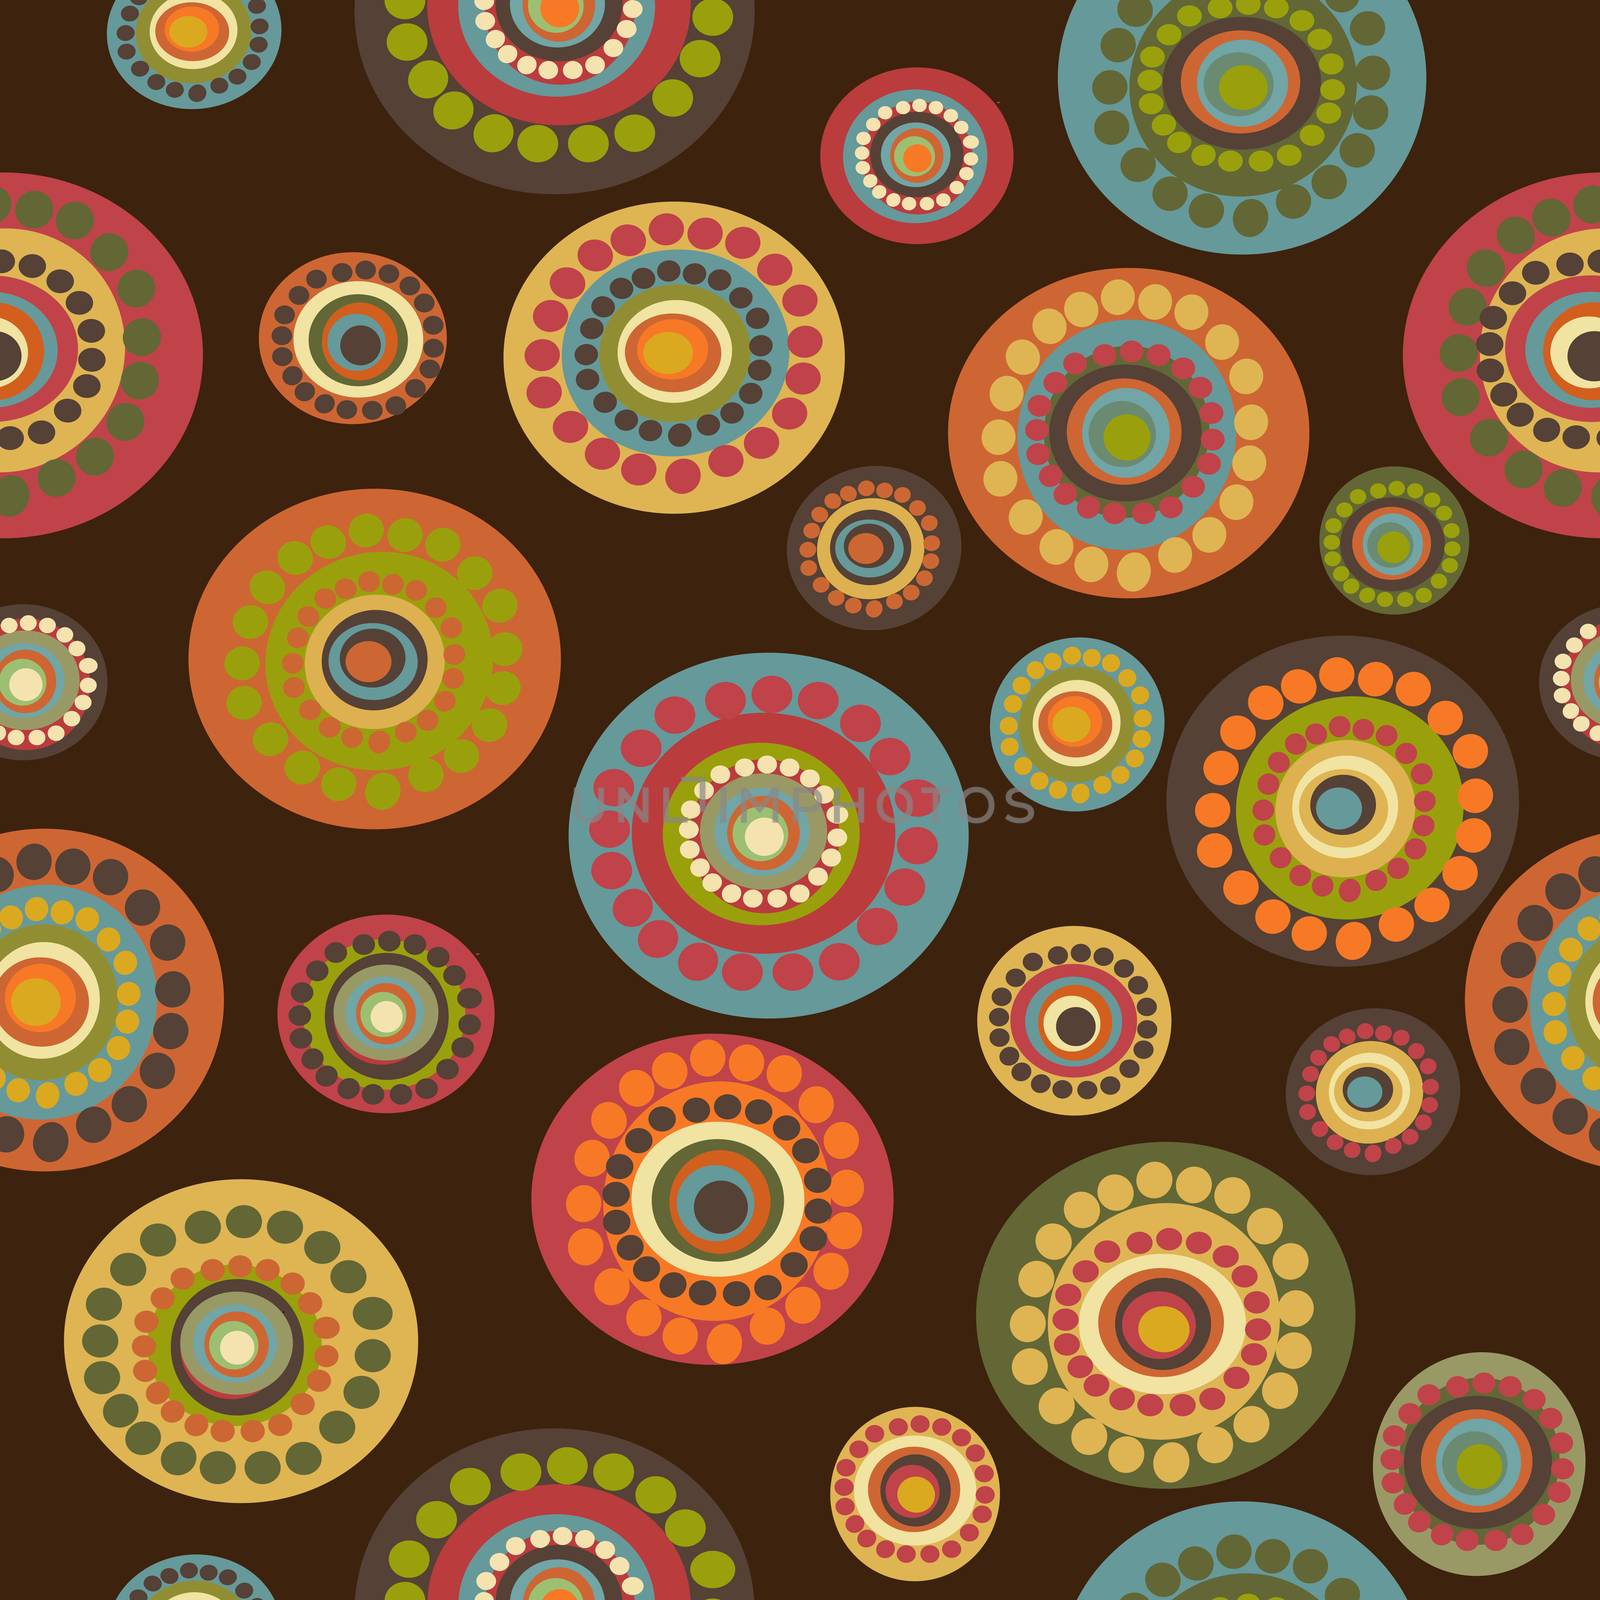 Retro floral seamless on brown background by hibrida13